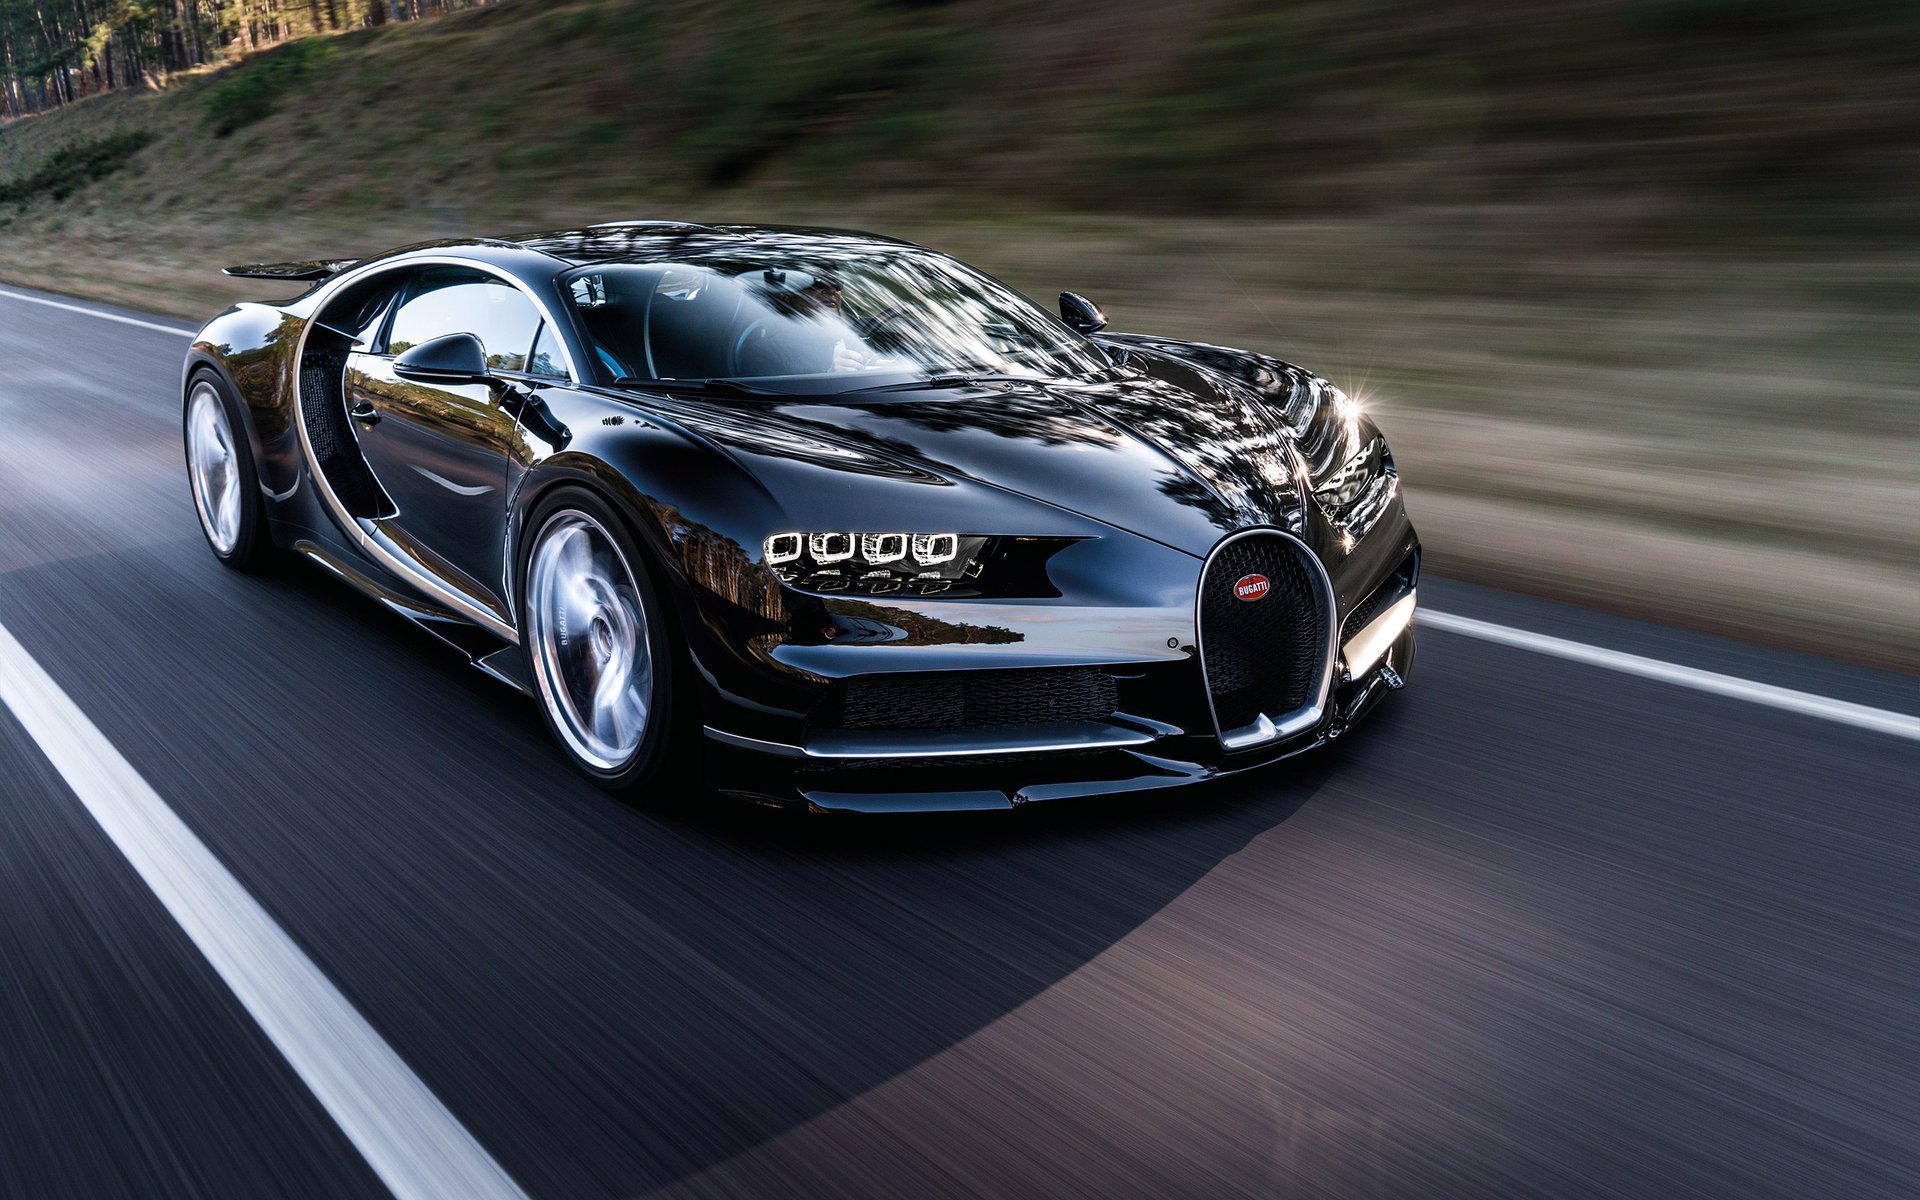 Bugatti at full speed on the road